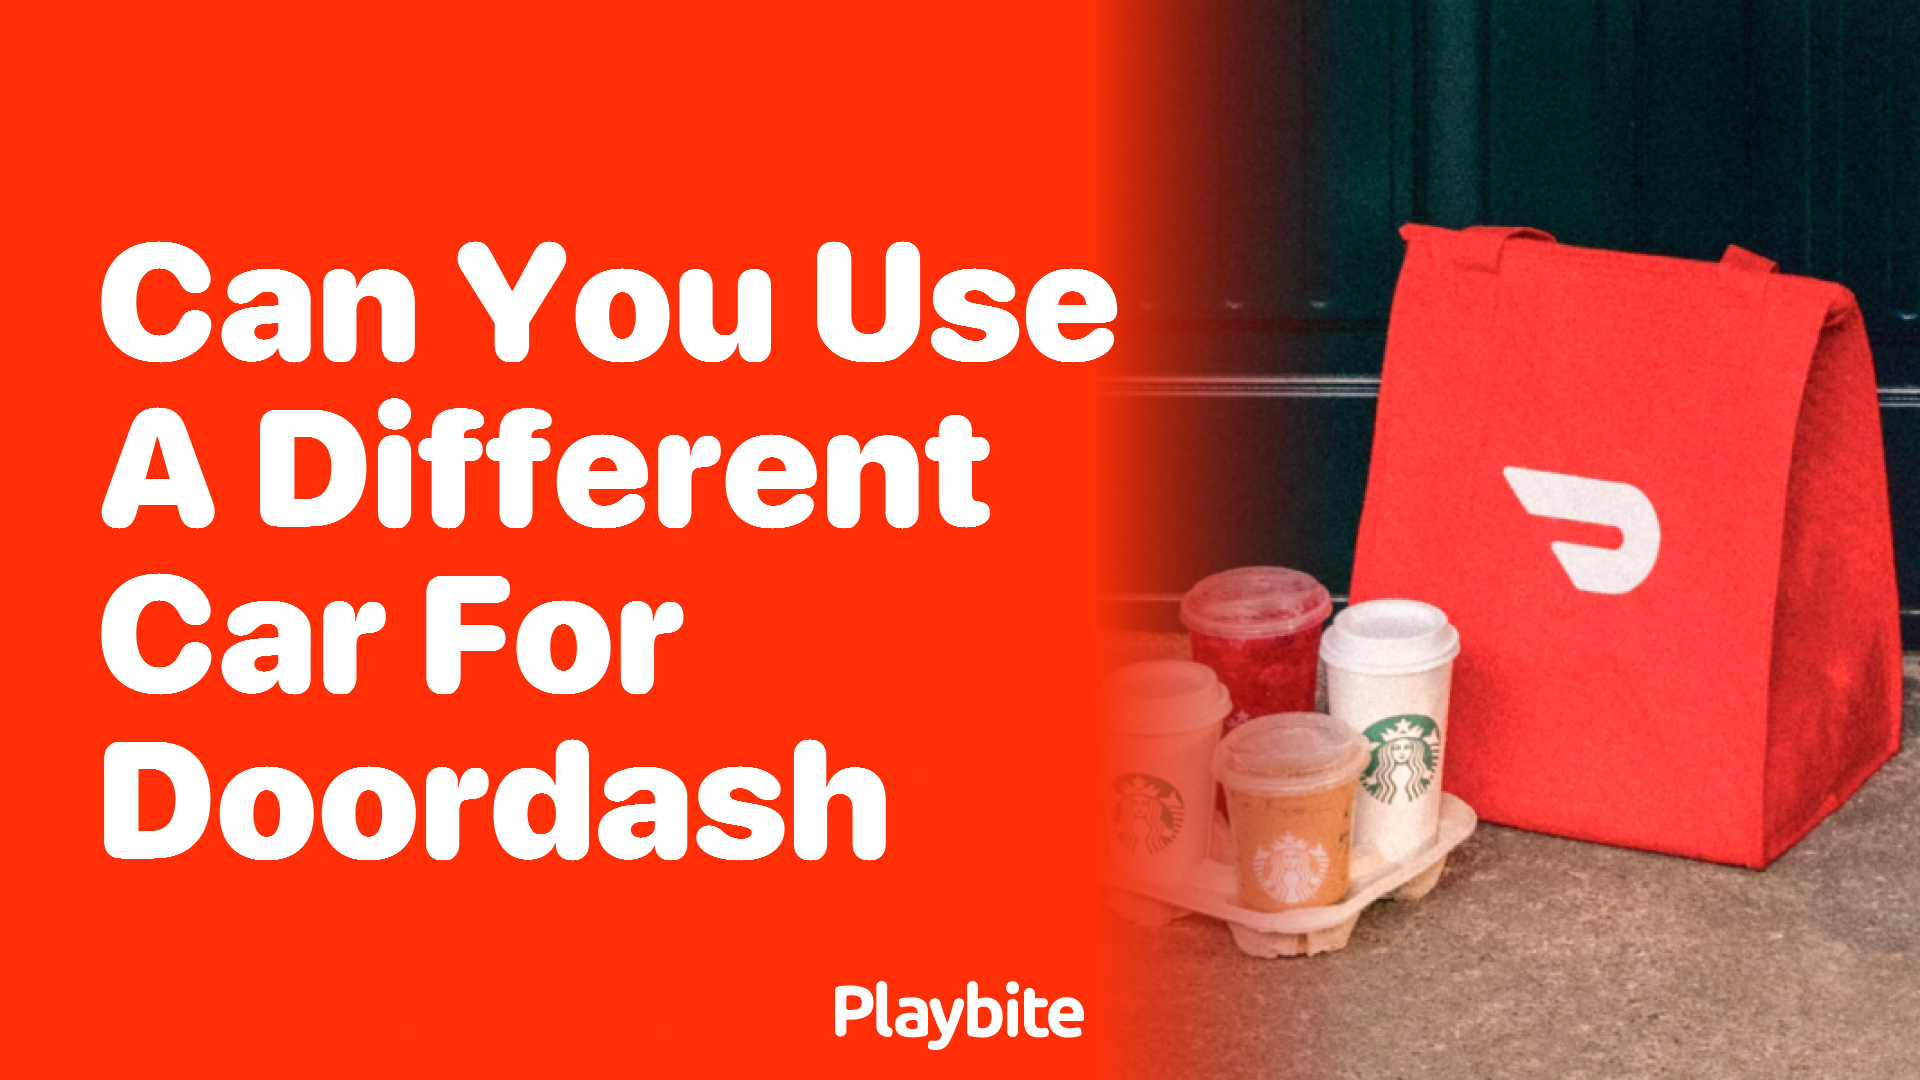 Can You Use a Different Car for DoorDash Deliveries?